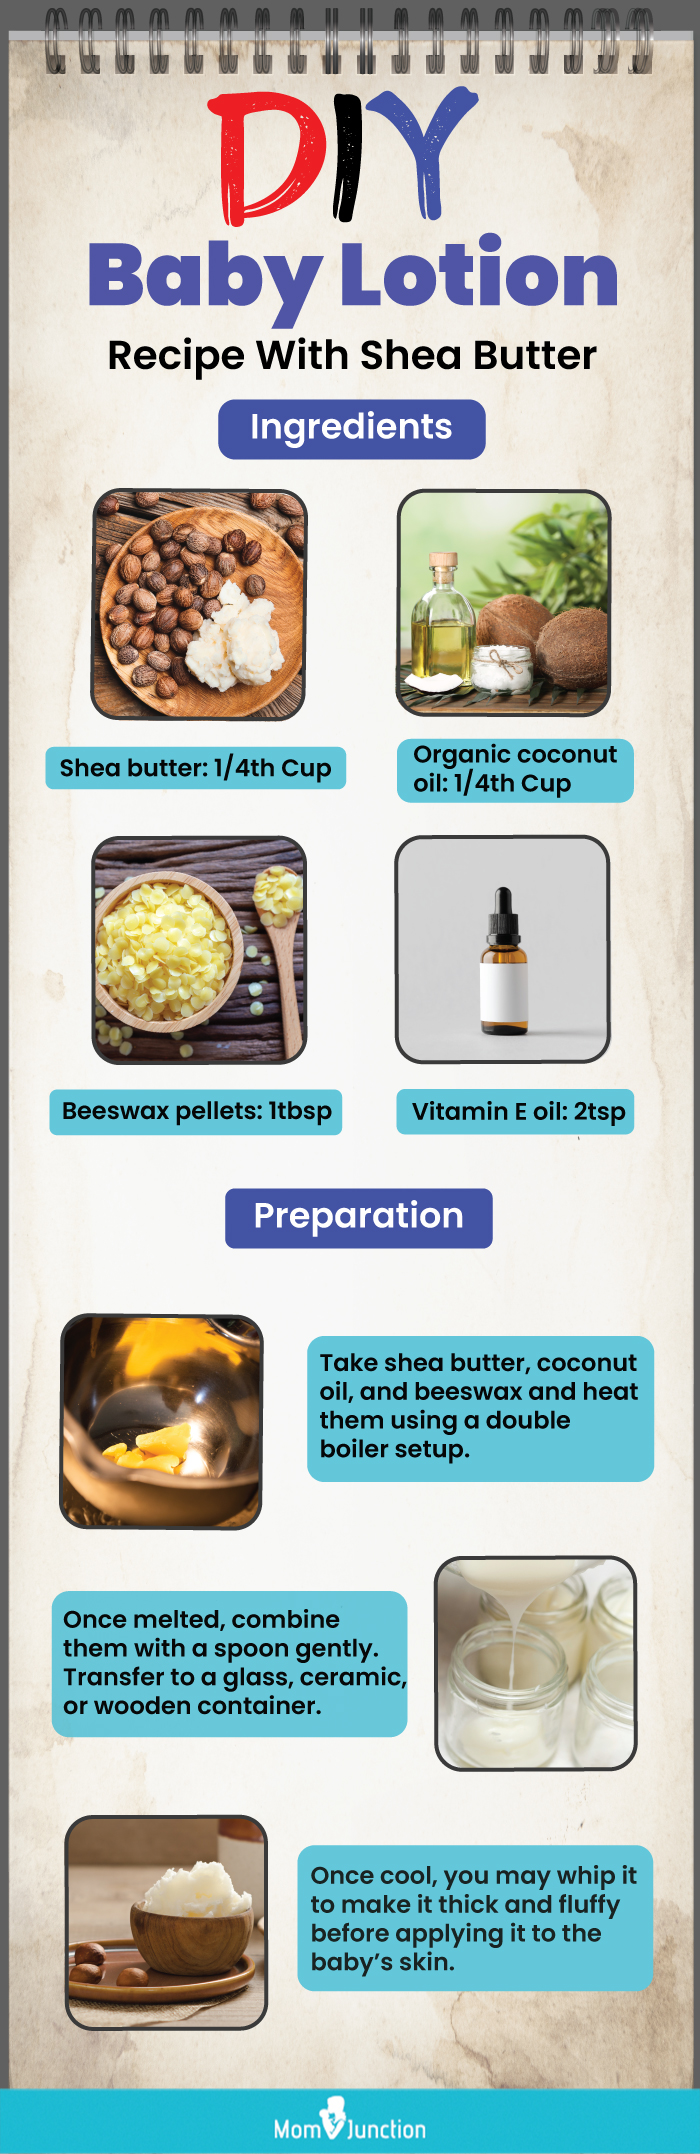 diy baby lotion recipe with shea butter (infographic)